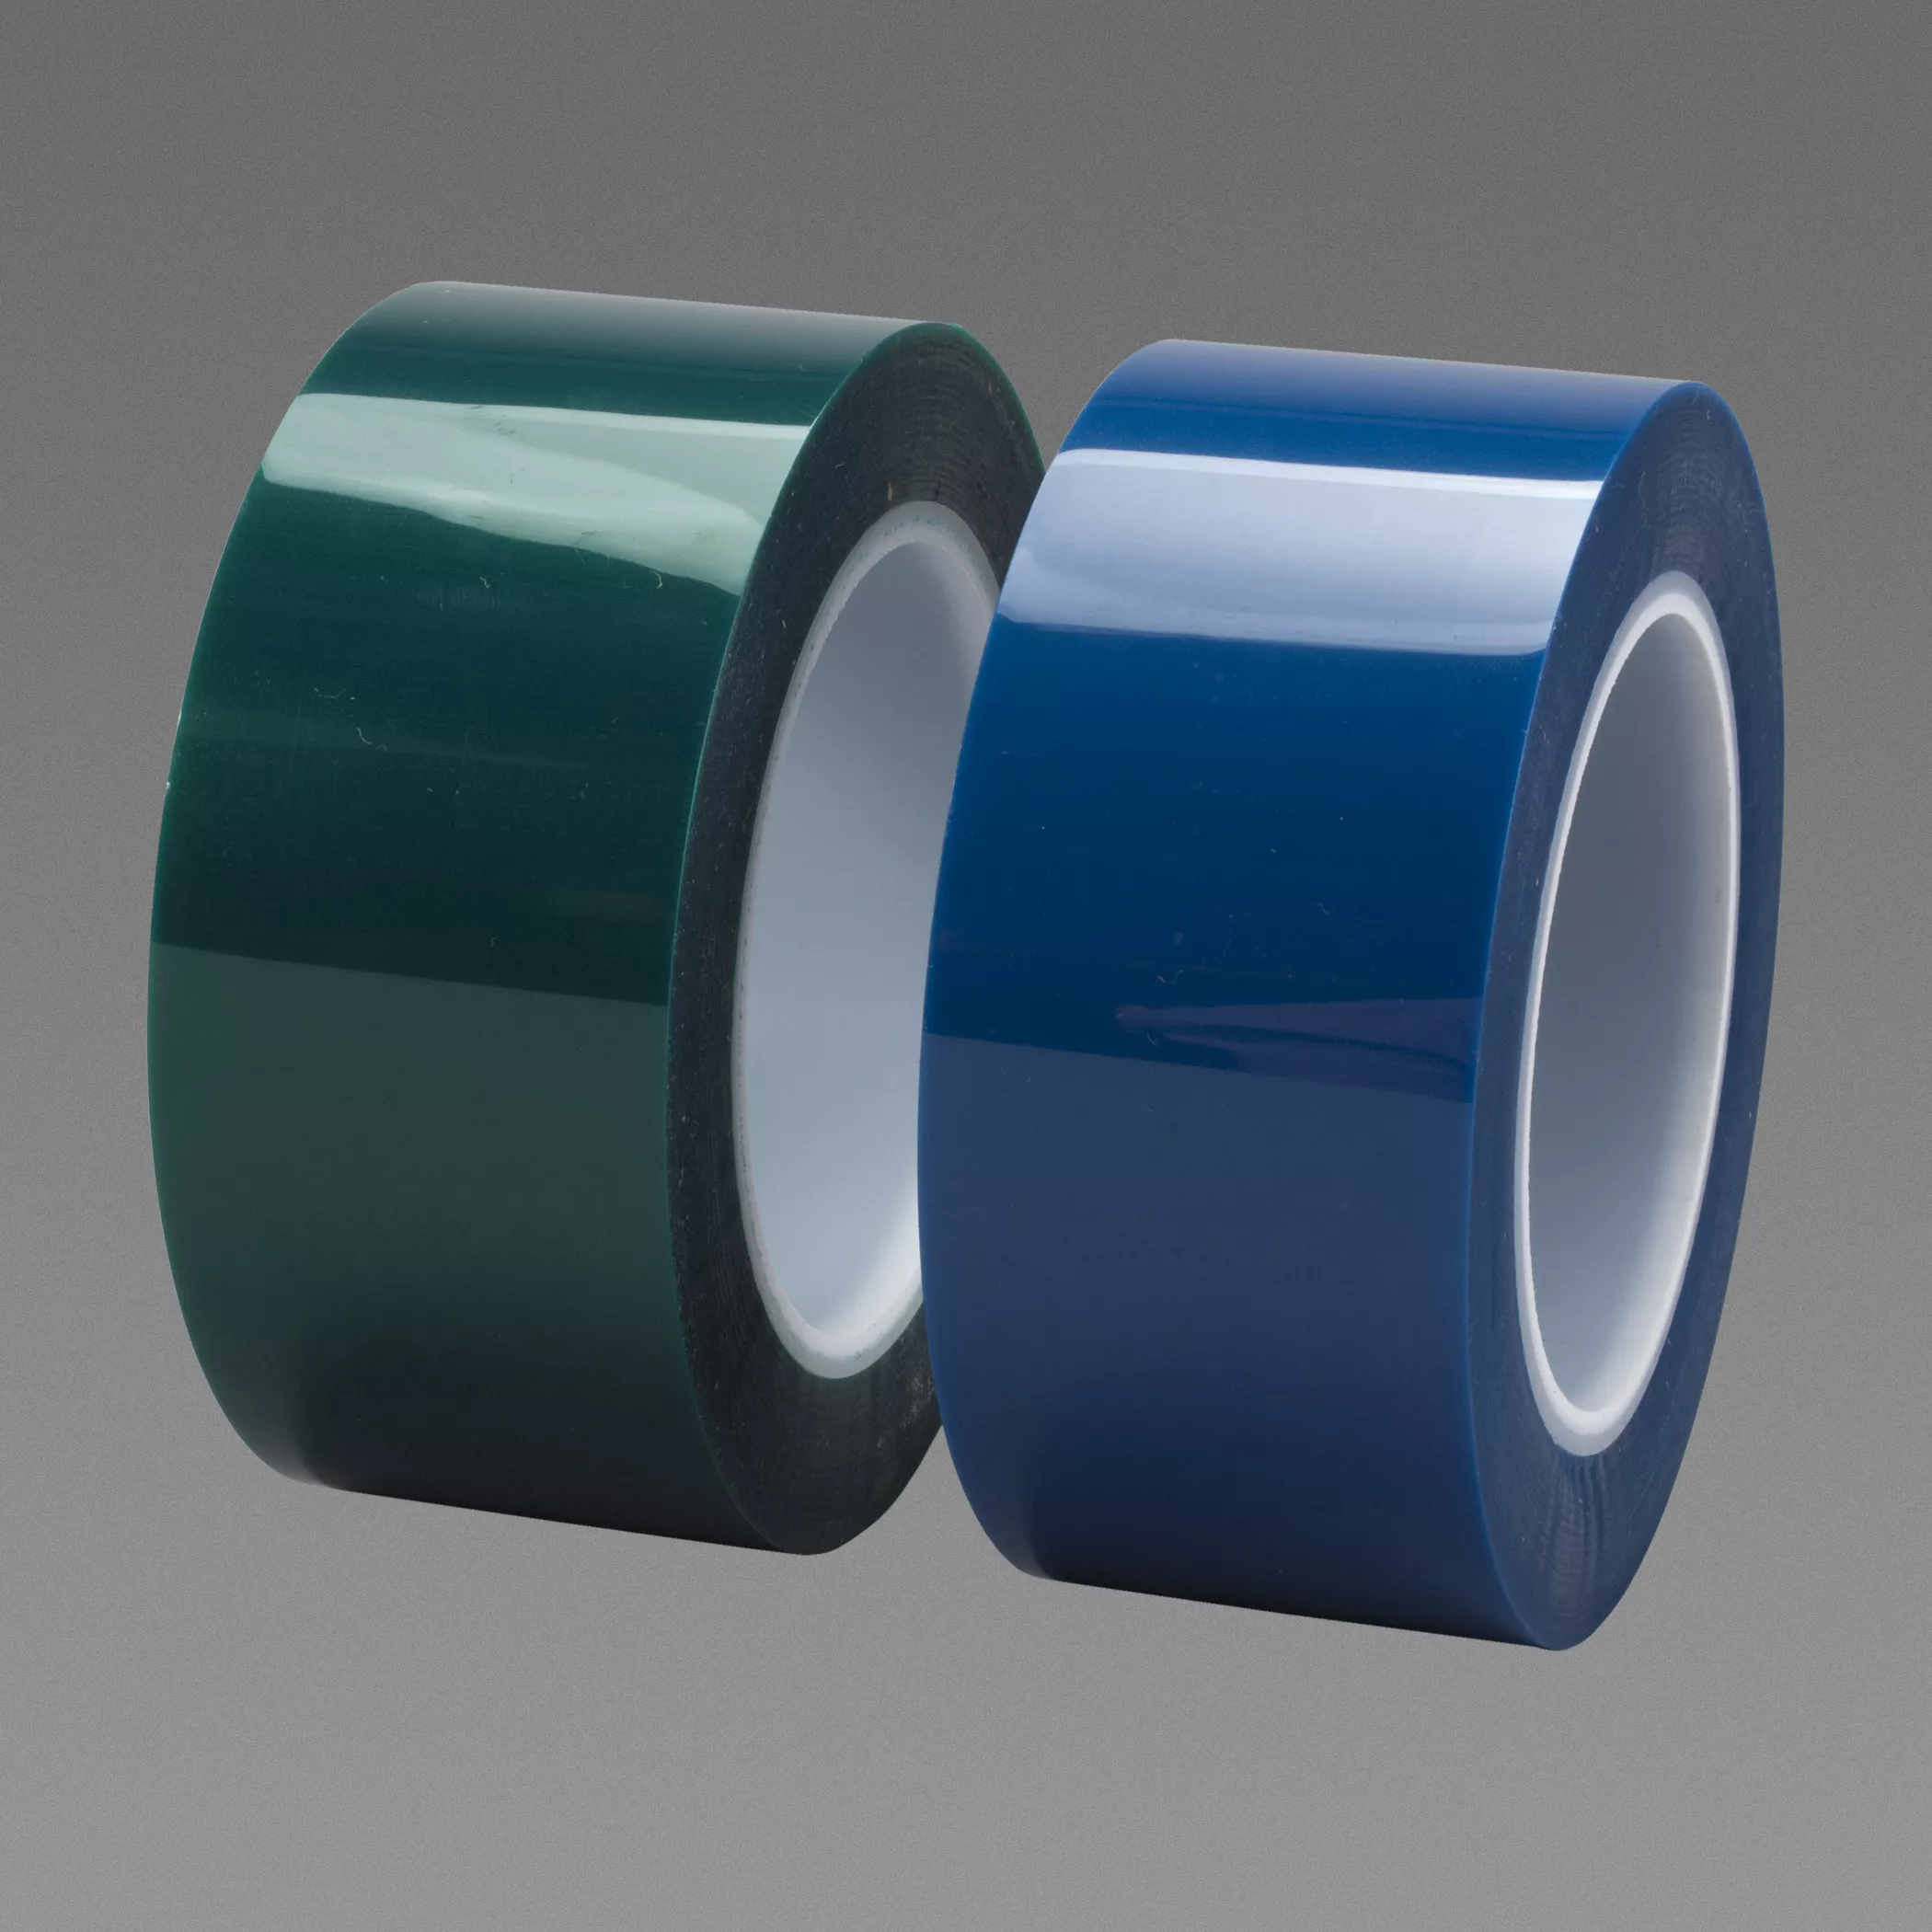 3M™ Polyester Tape 8991L, Blue, 50.4 in x 72 yd, 2.4 mil, 1 roll per
case